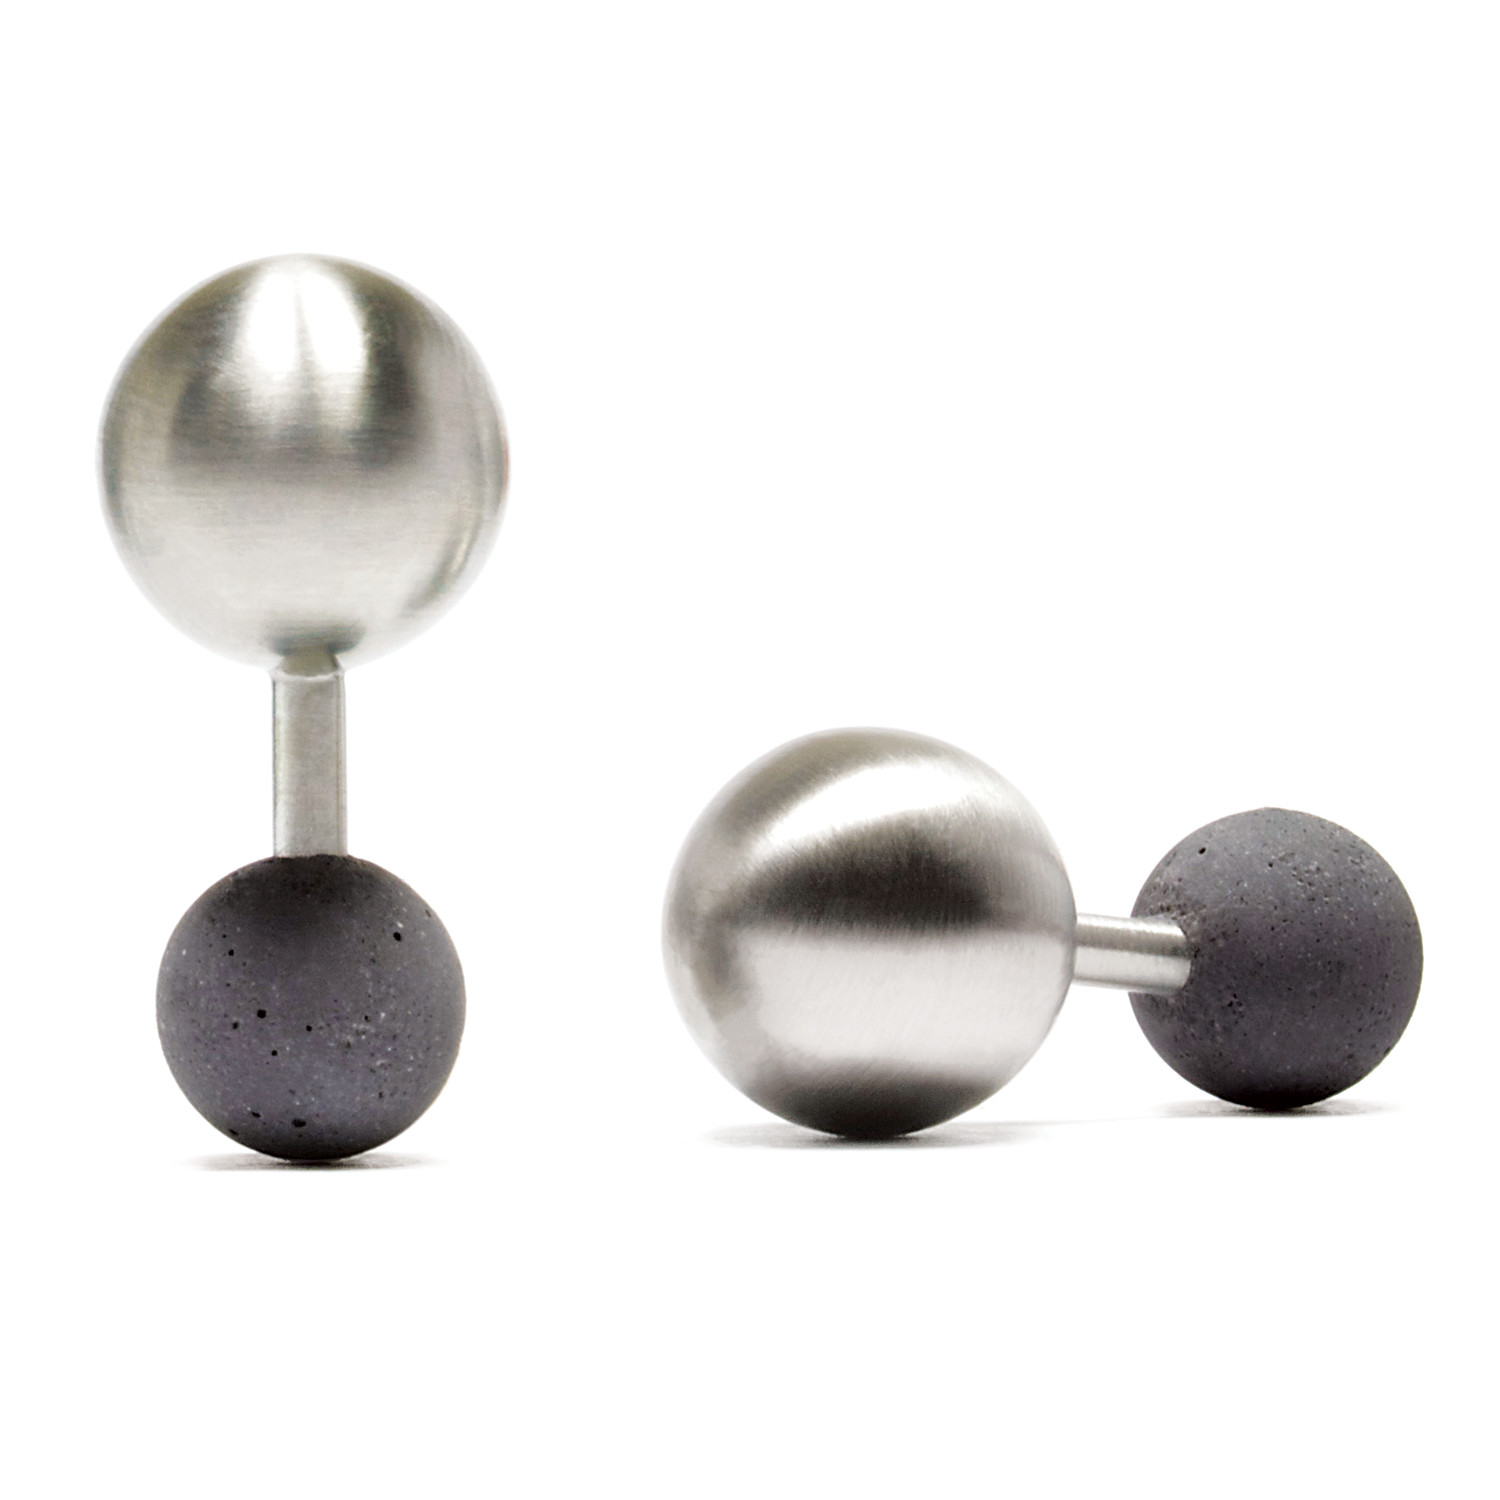 Concrete Ball Return Cufflinks // Stainless Steel - Suiting Clearance